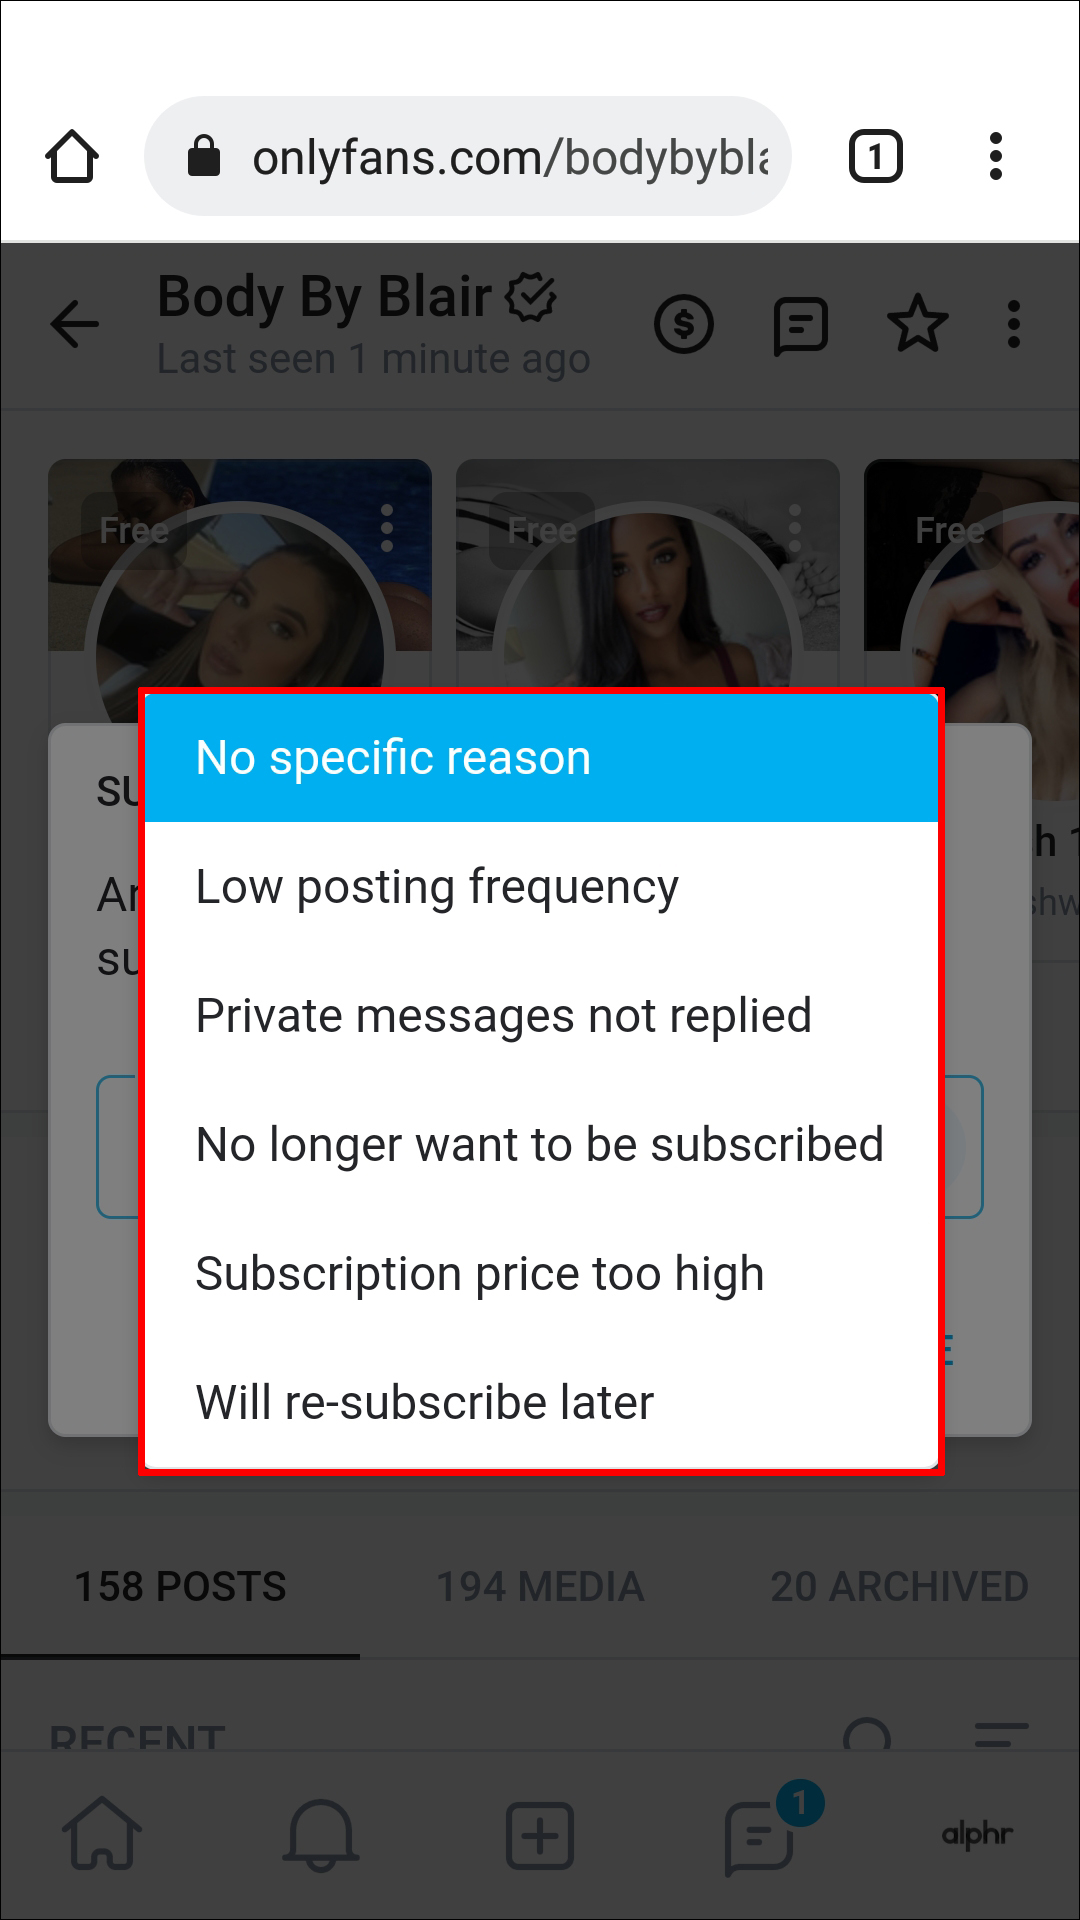 Unsubscribe only fans 